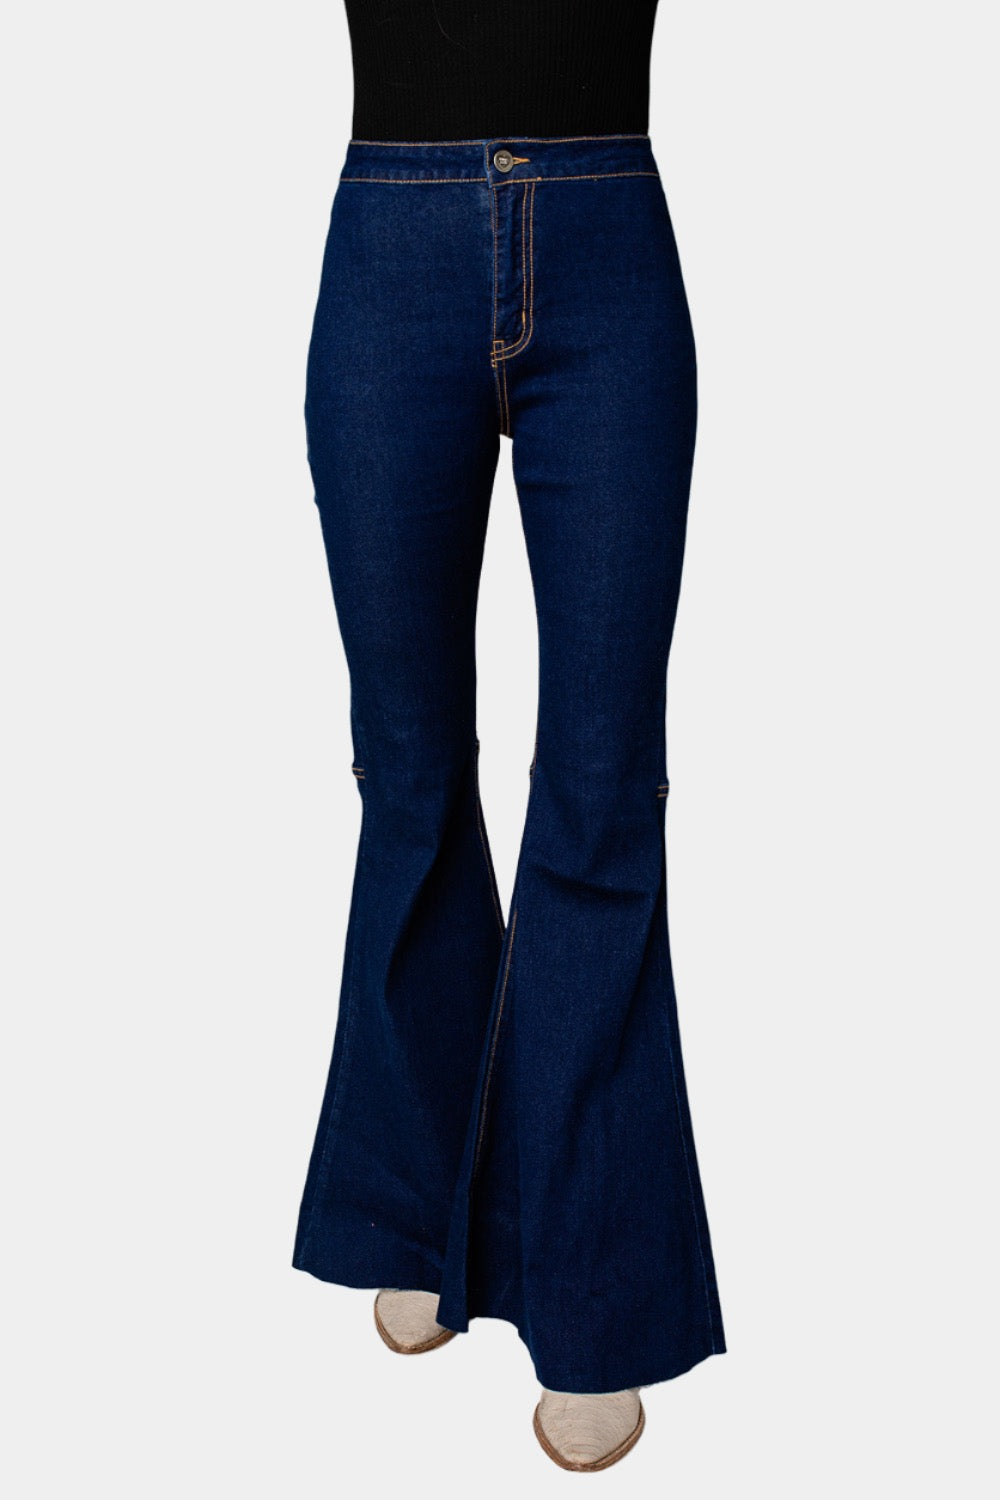 LaiyiVic Skinny Ripped Bell Bottom Jeans for Women Classic India | Ubuy